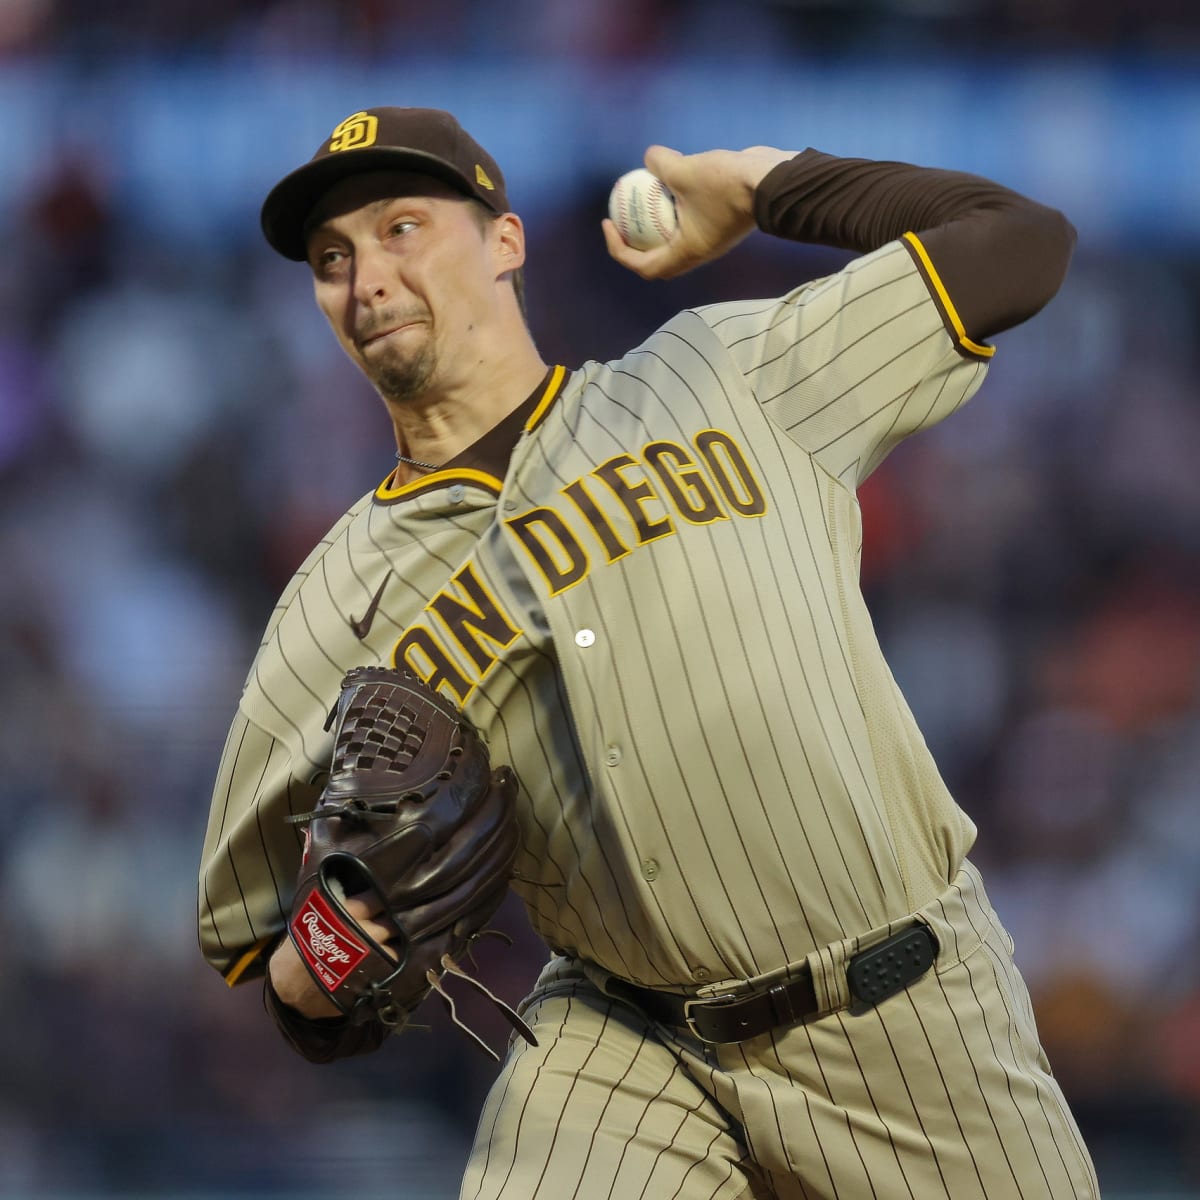 Report: San Diego Padres finalizing deal for pitcher Blake Snell